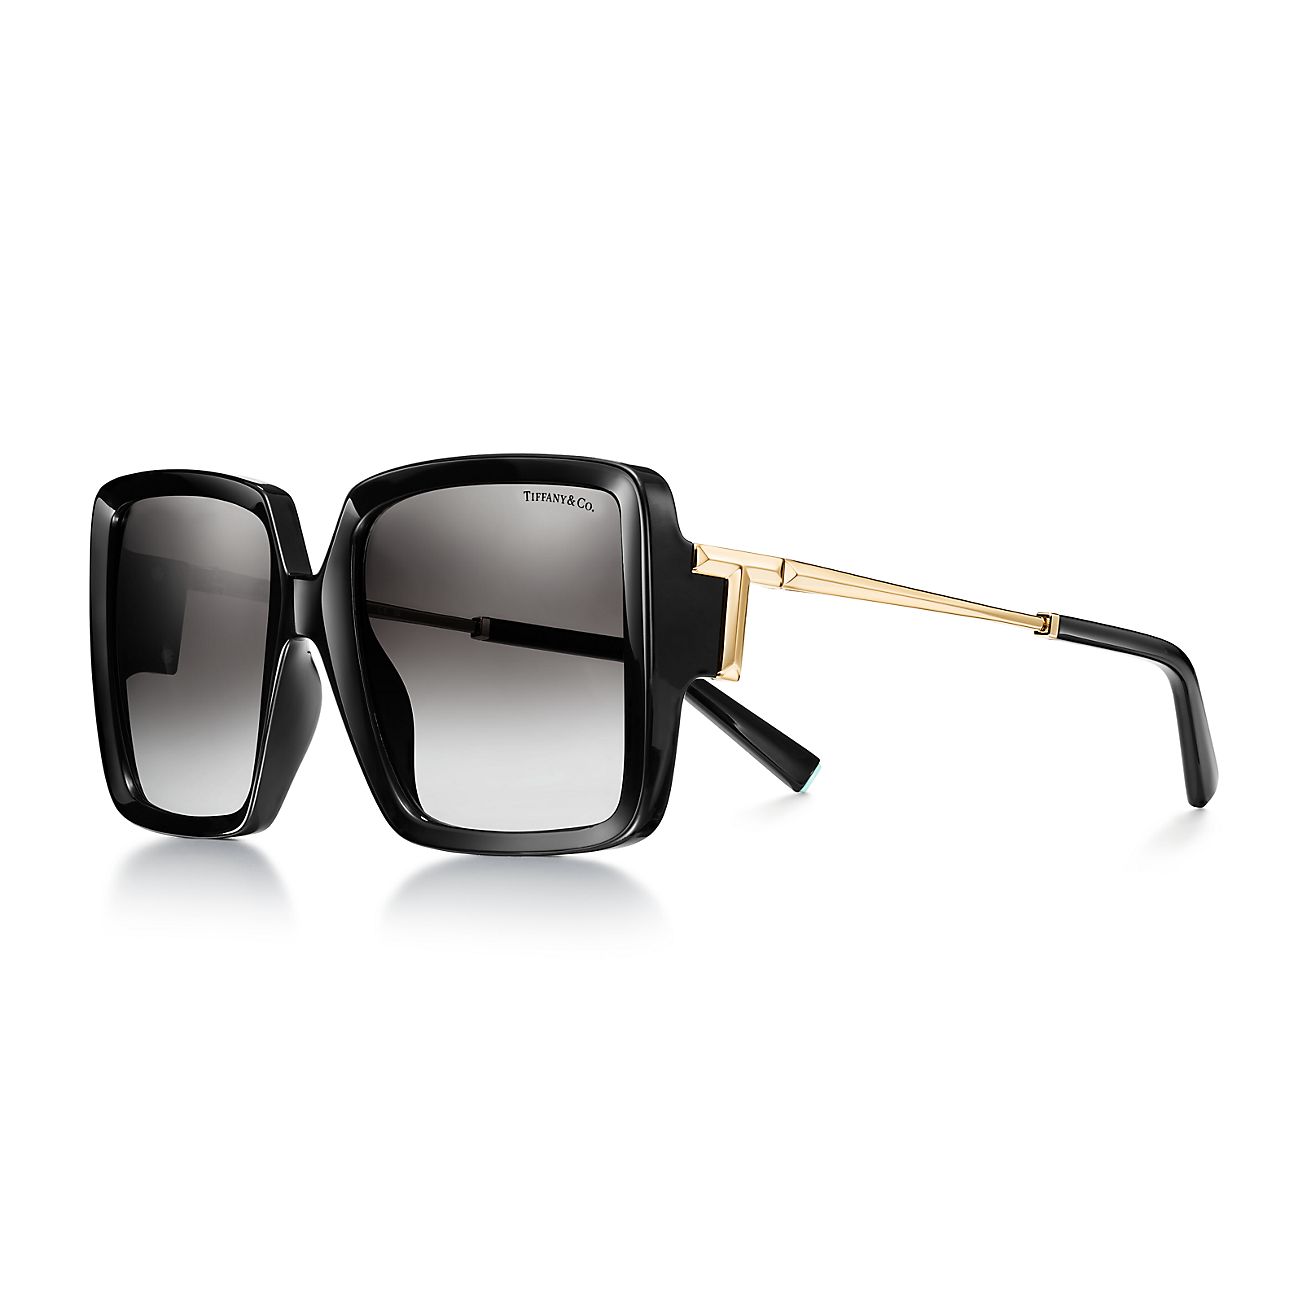 Tiffany T Sunglasses in Black Acetate with Gray Gradient Lenses | Tiffany &  Co.